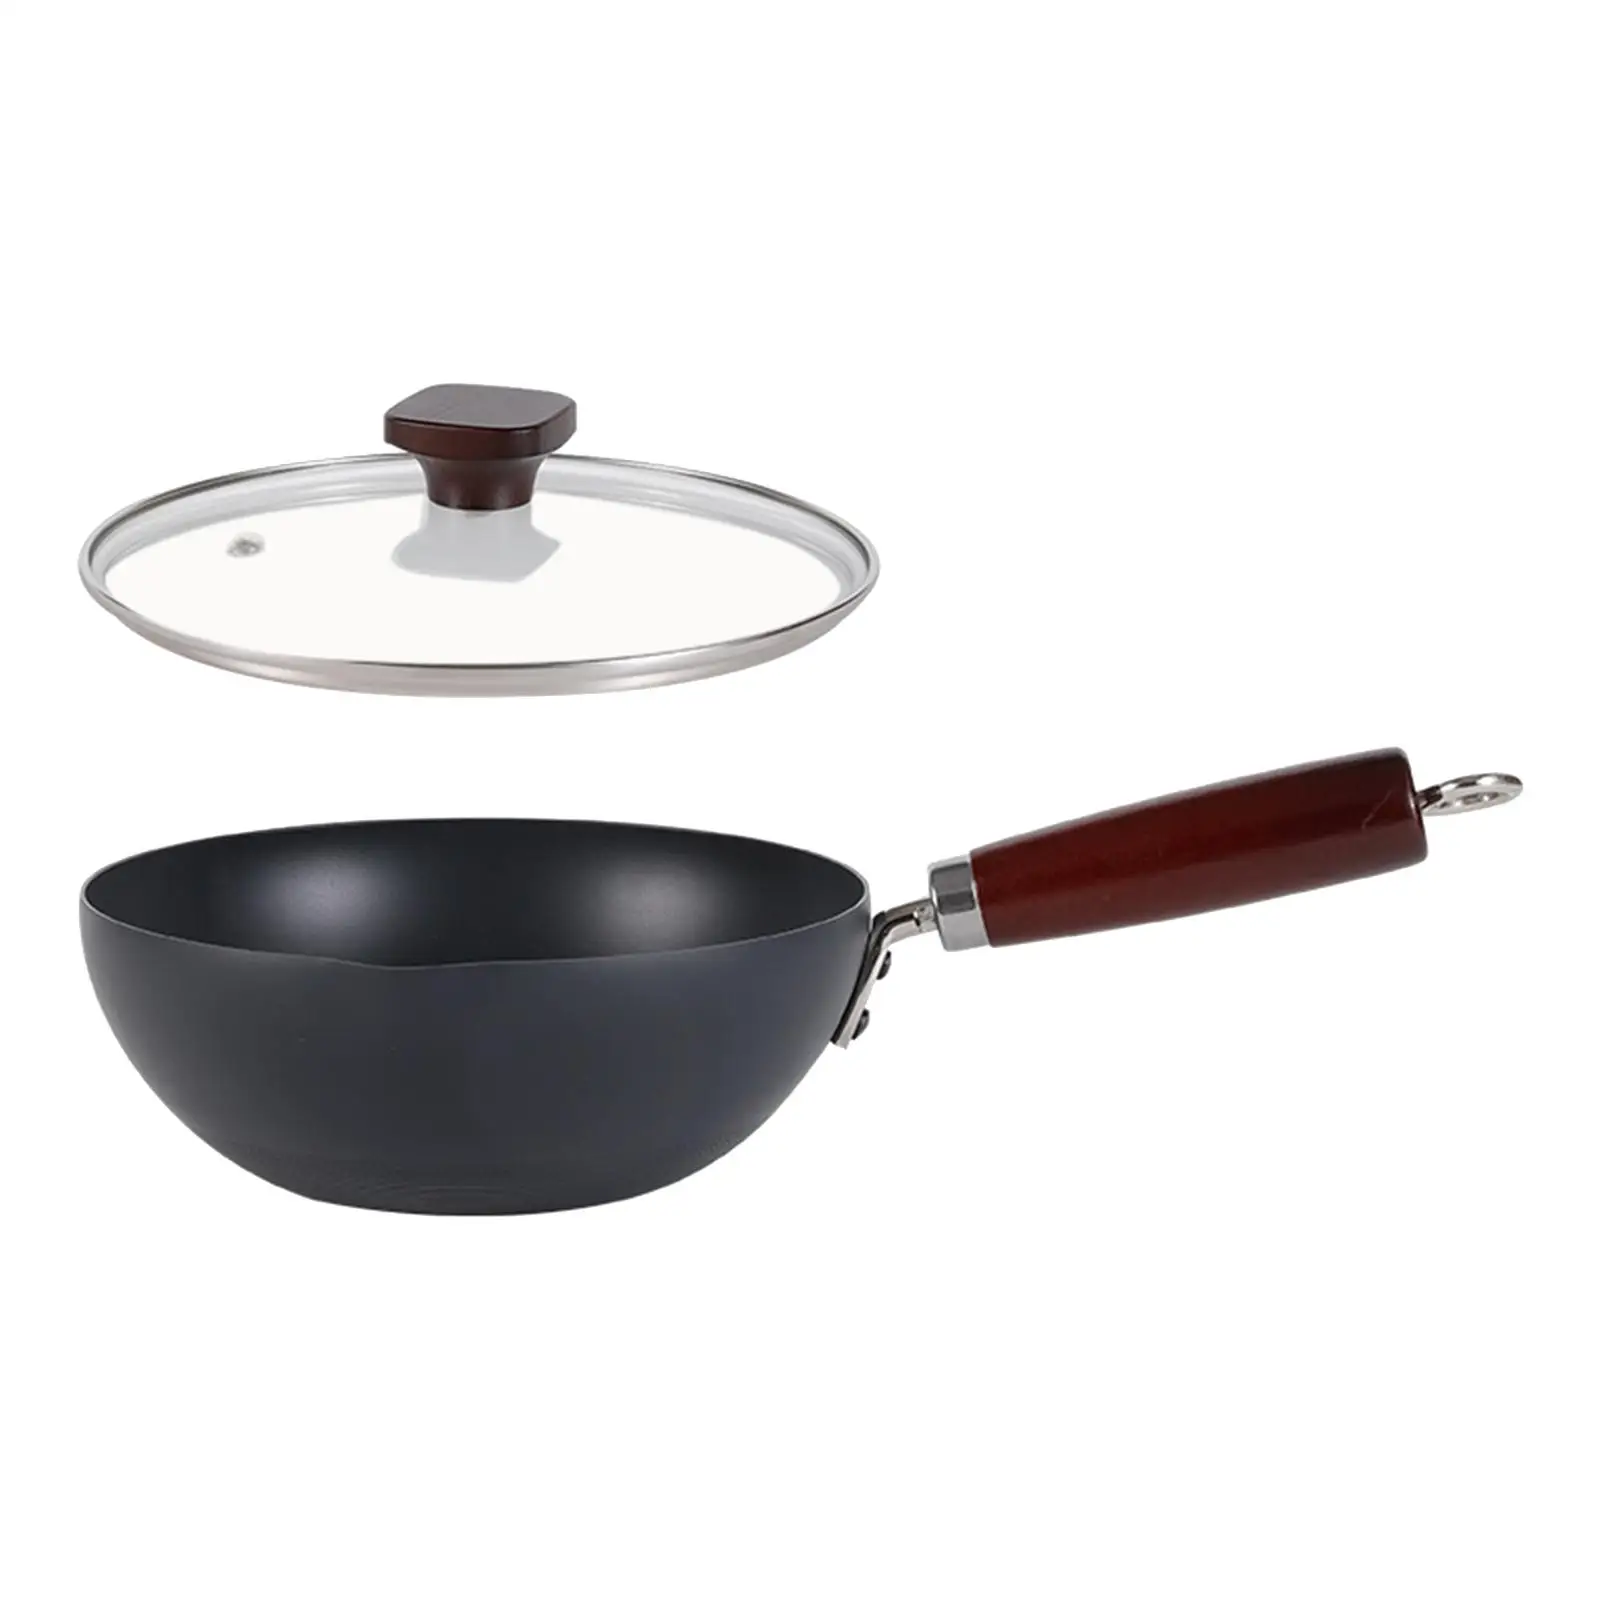 Wok Pan with Lid Nonstick Wok with Cover for Induction, Gas All Stoves,